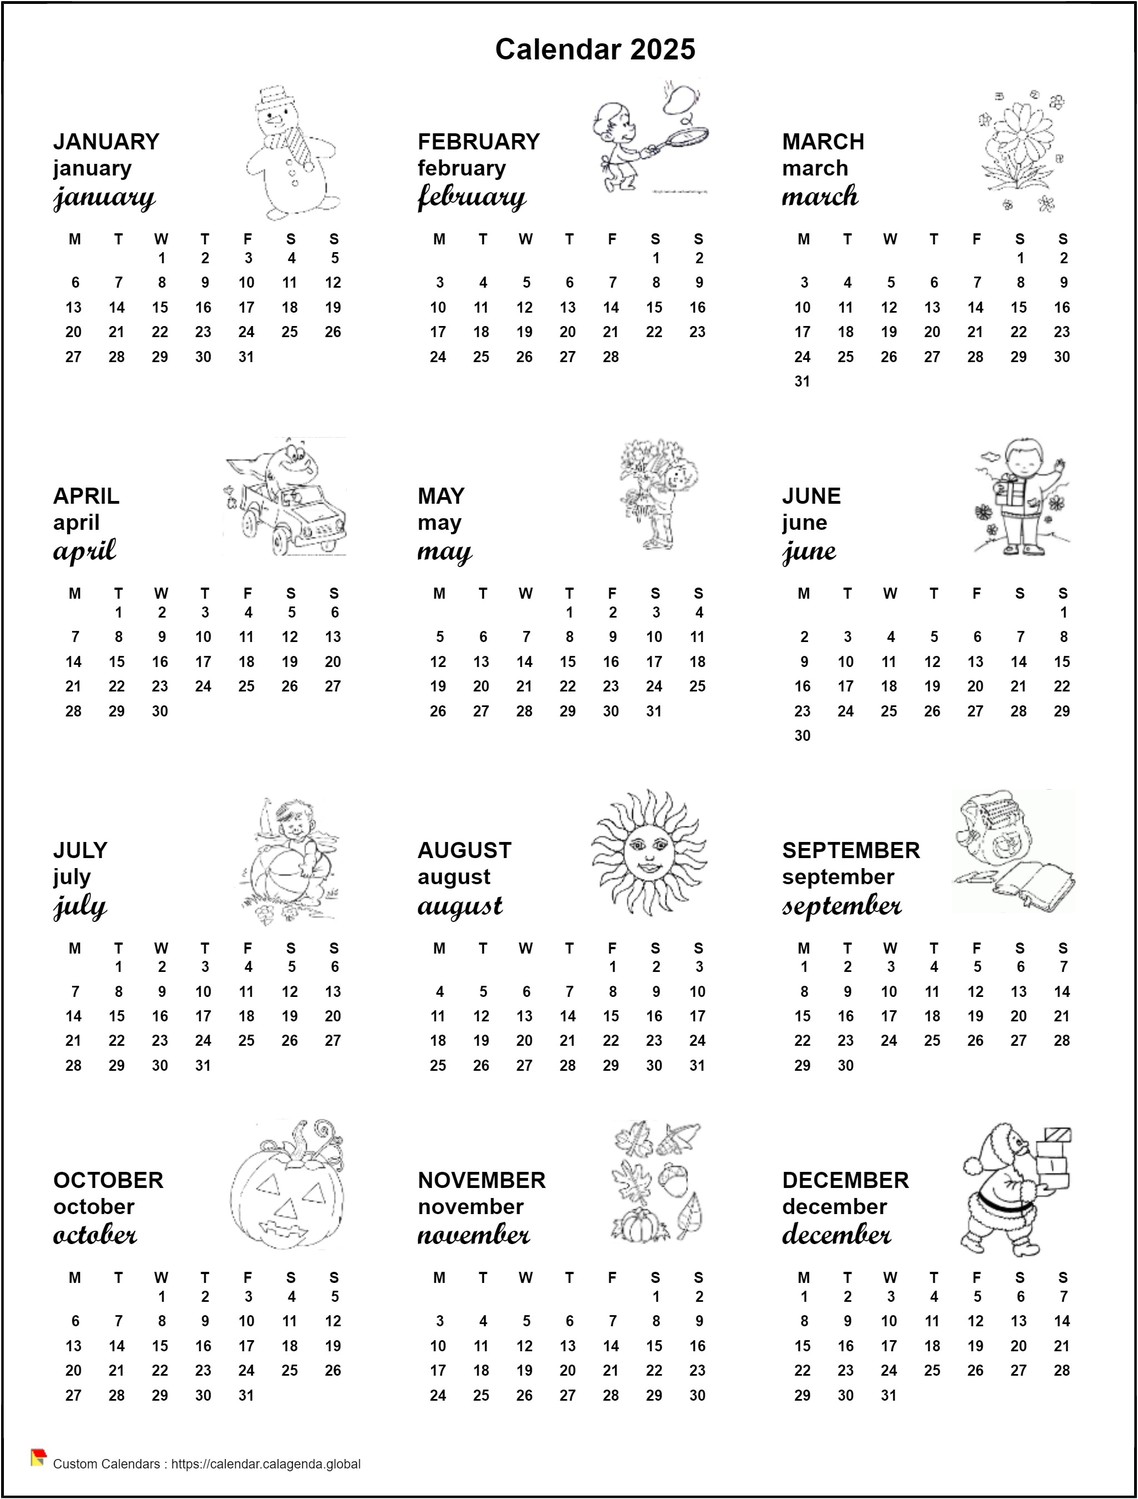 Calendar 2045 annual maternal and primary school